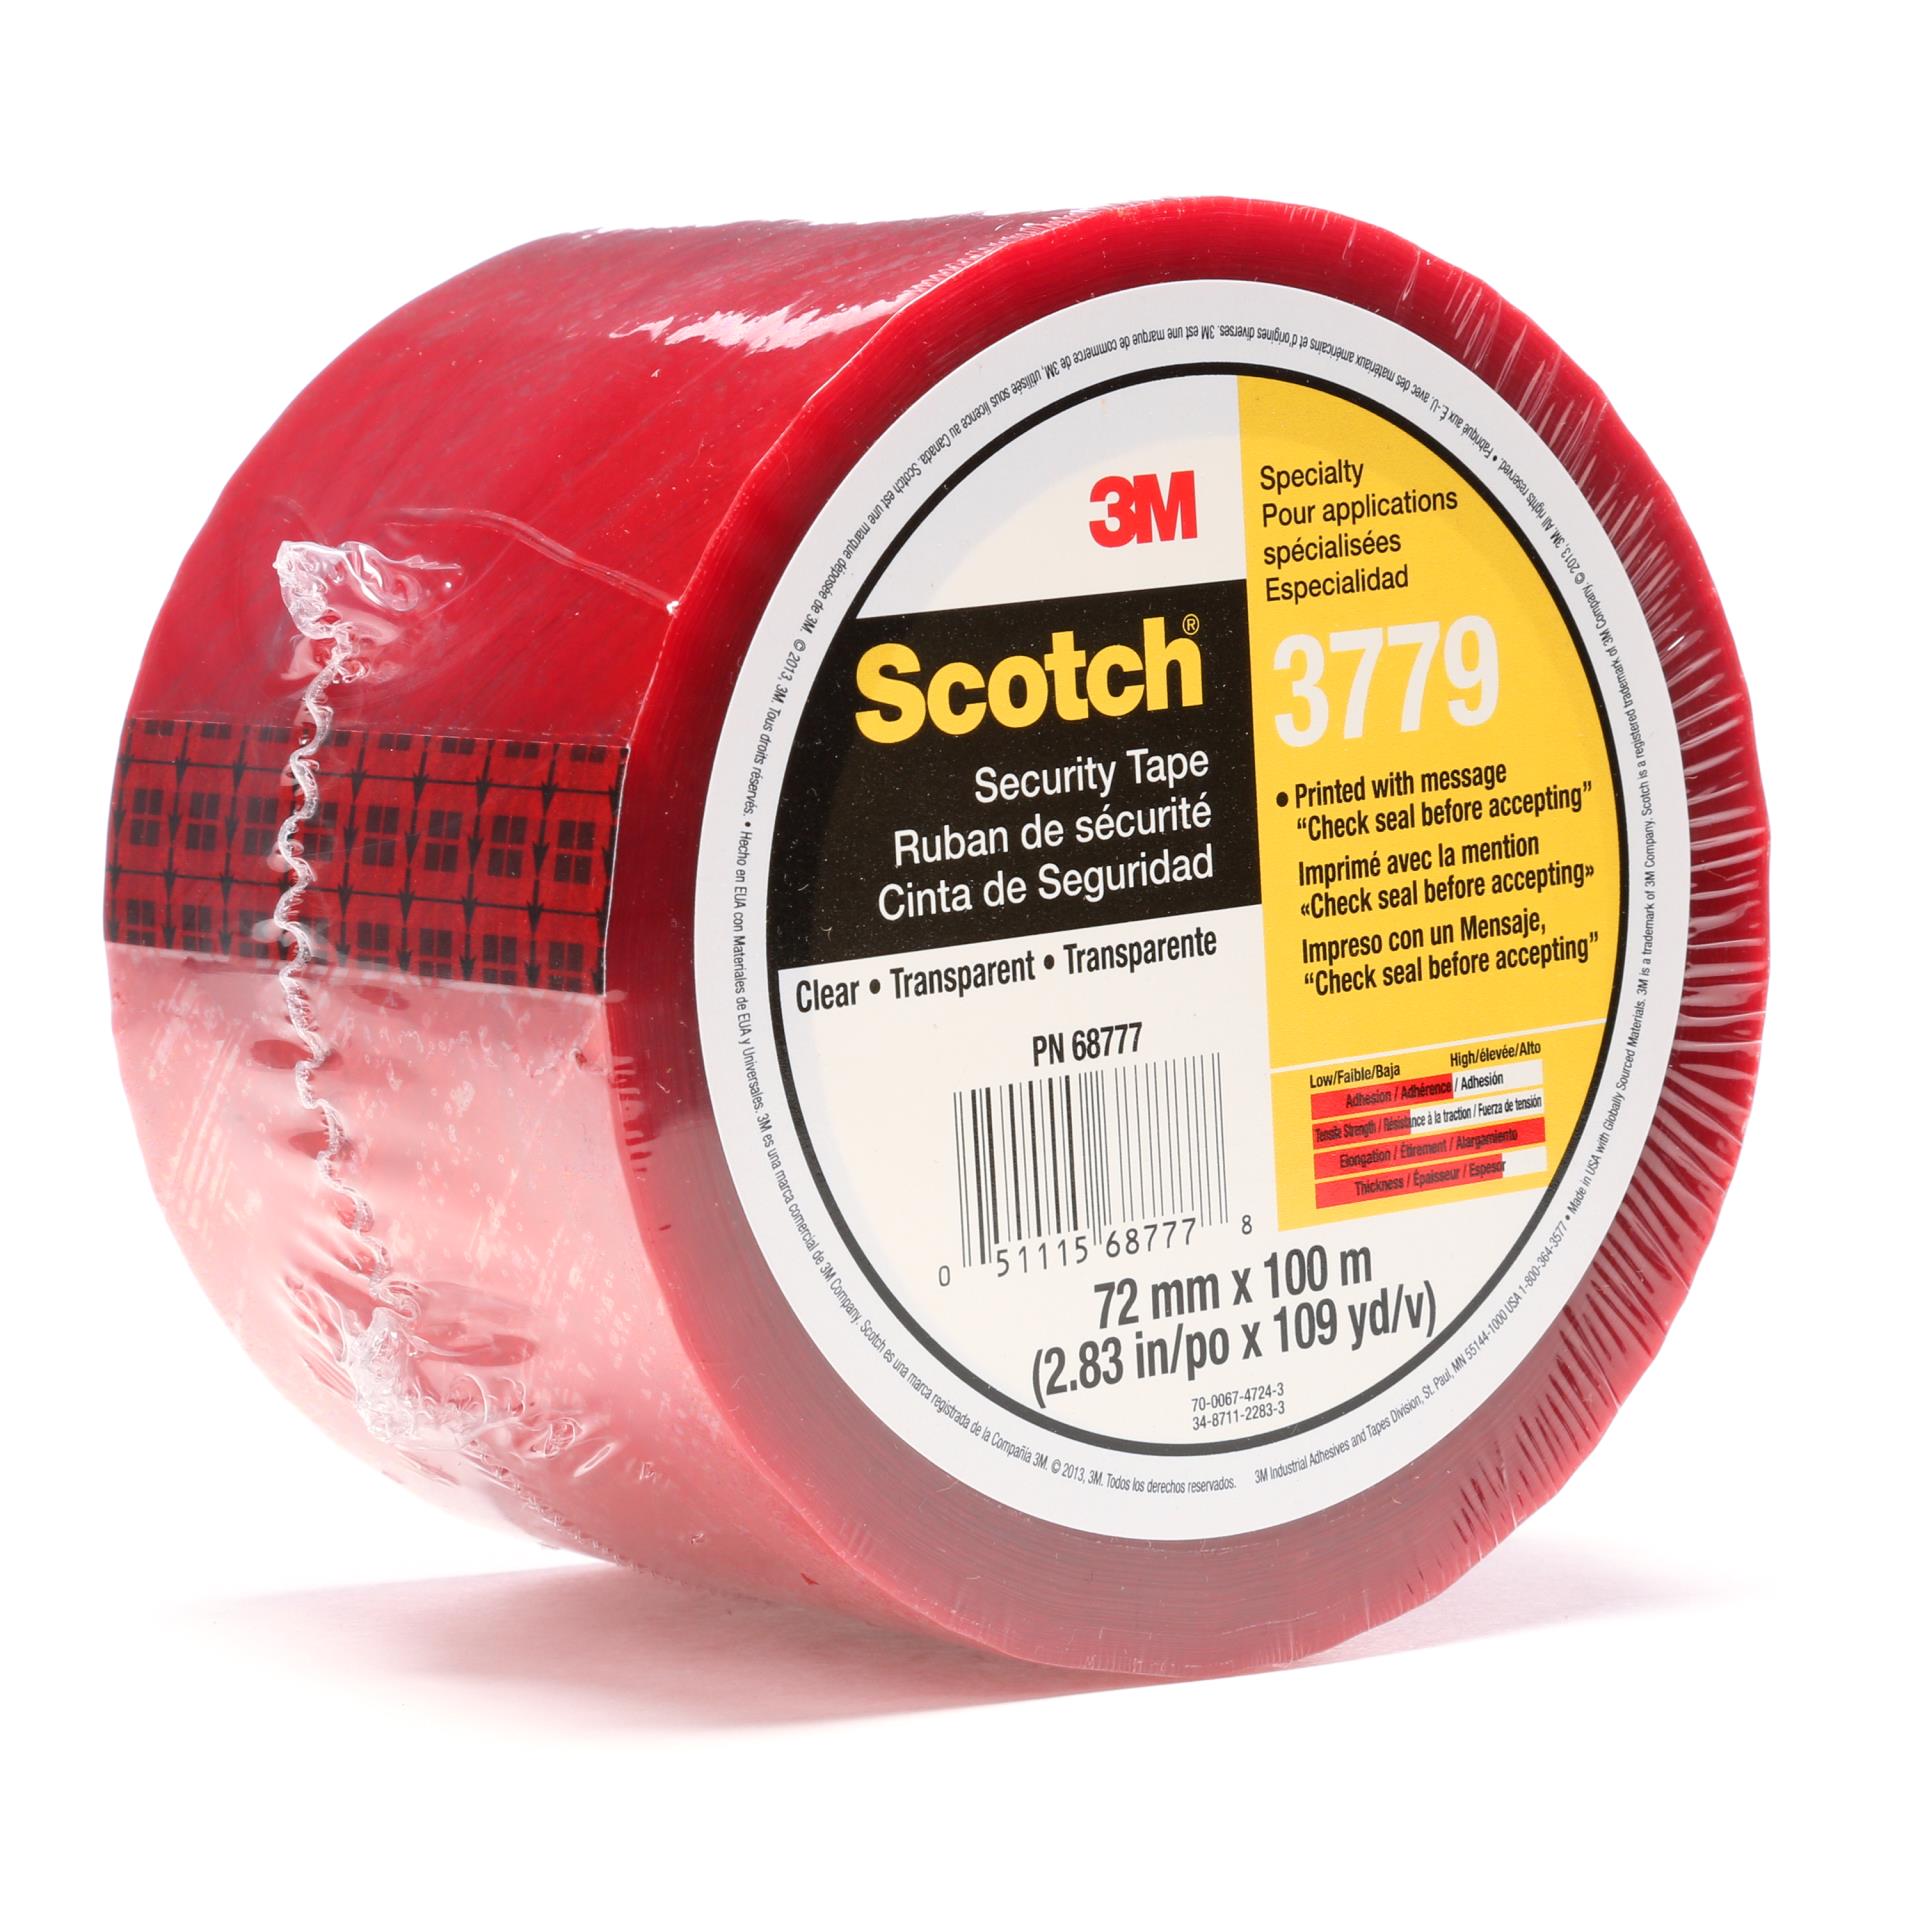 Scotch Security Message Box Sealing Tape 3199 Pack of 1 48 mm x 914 m 